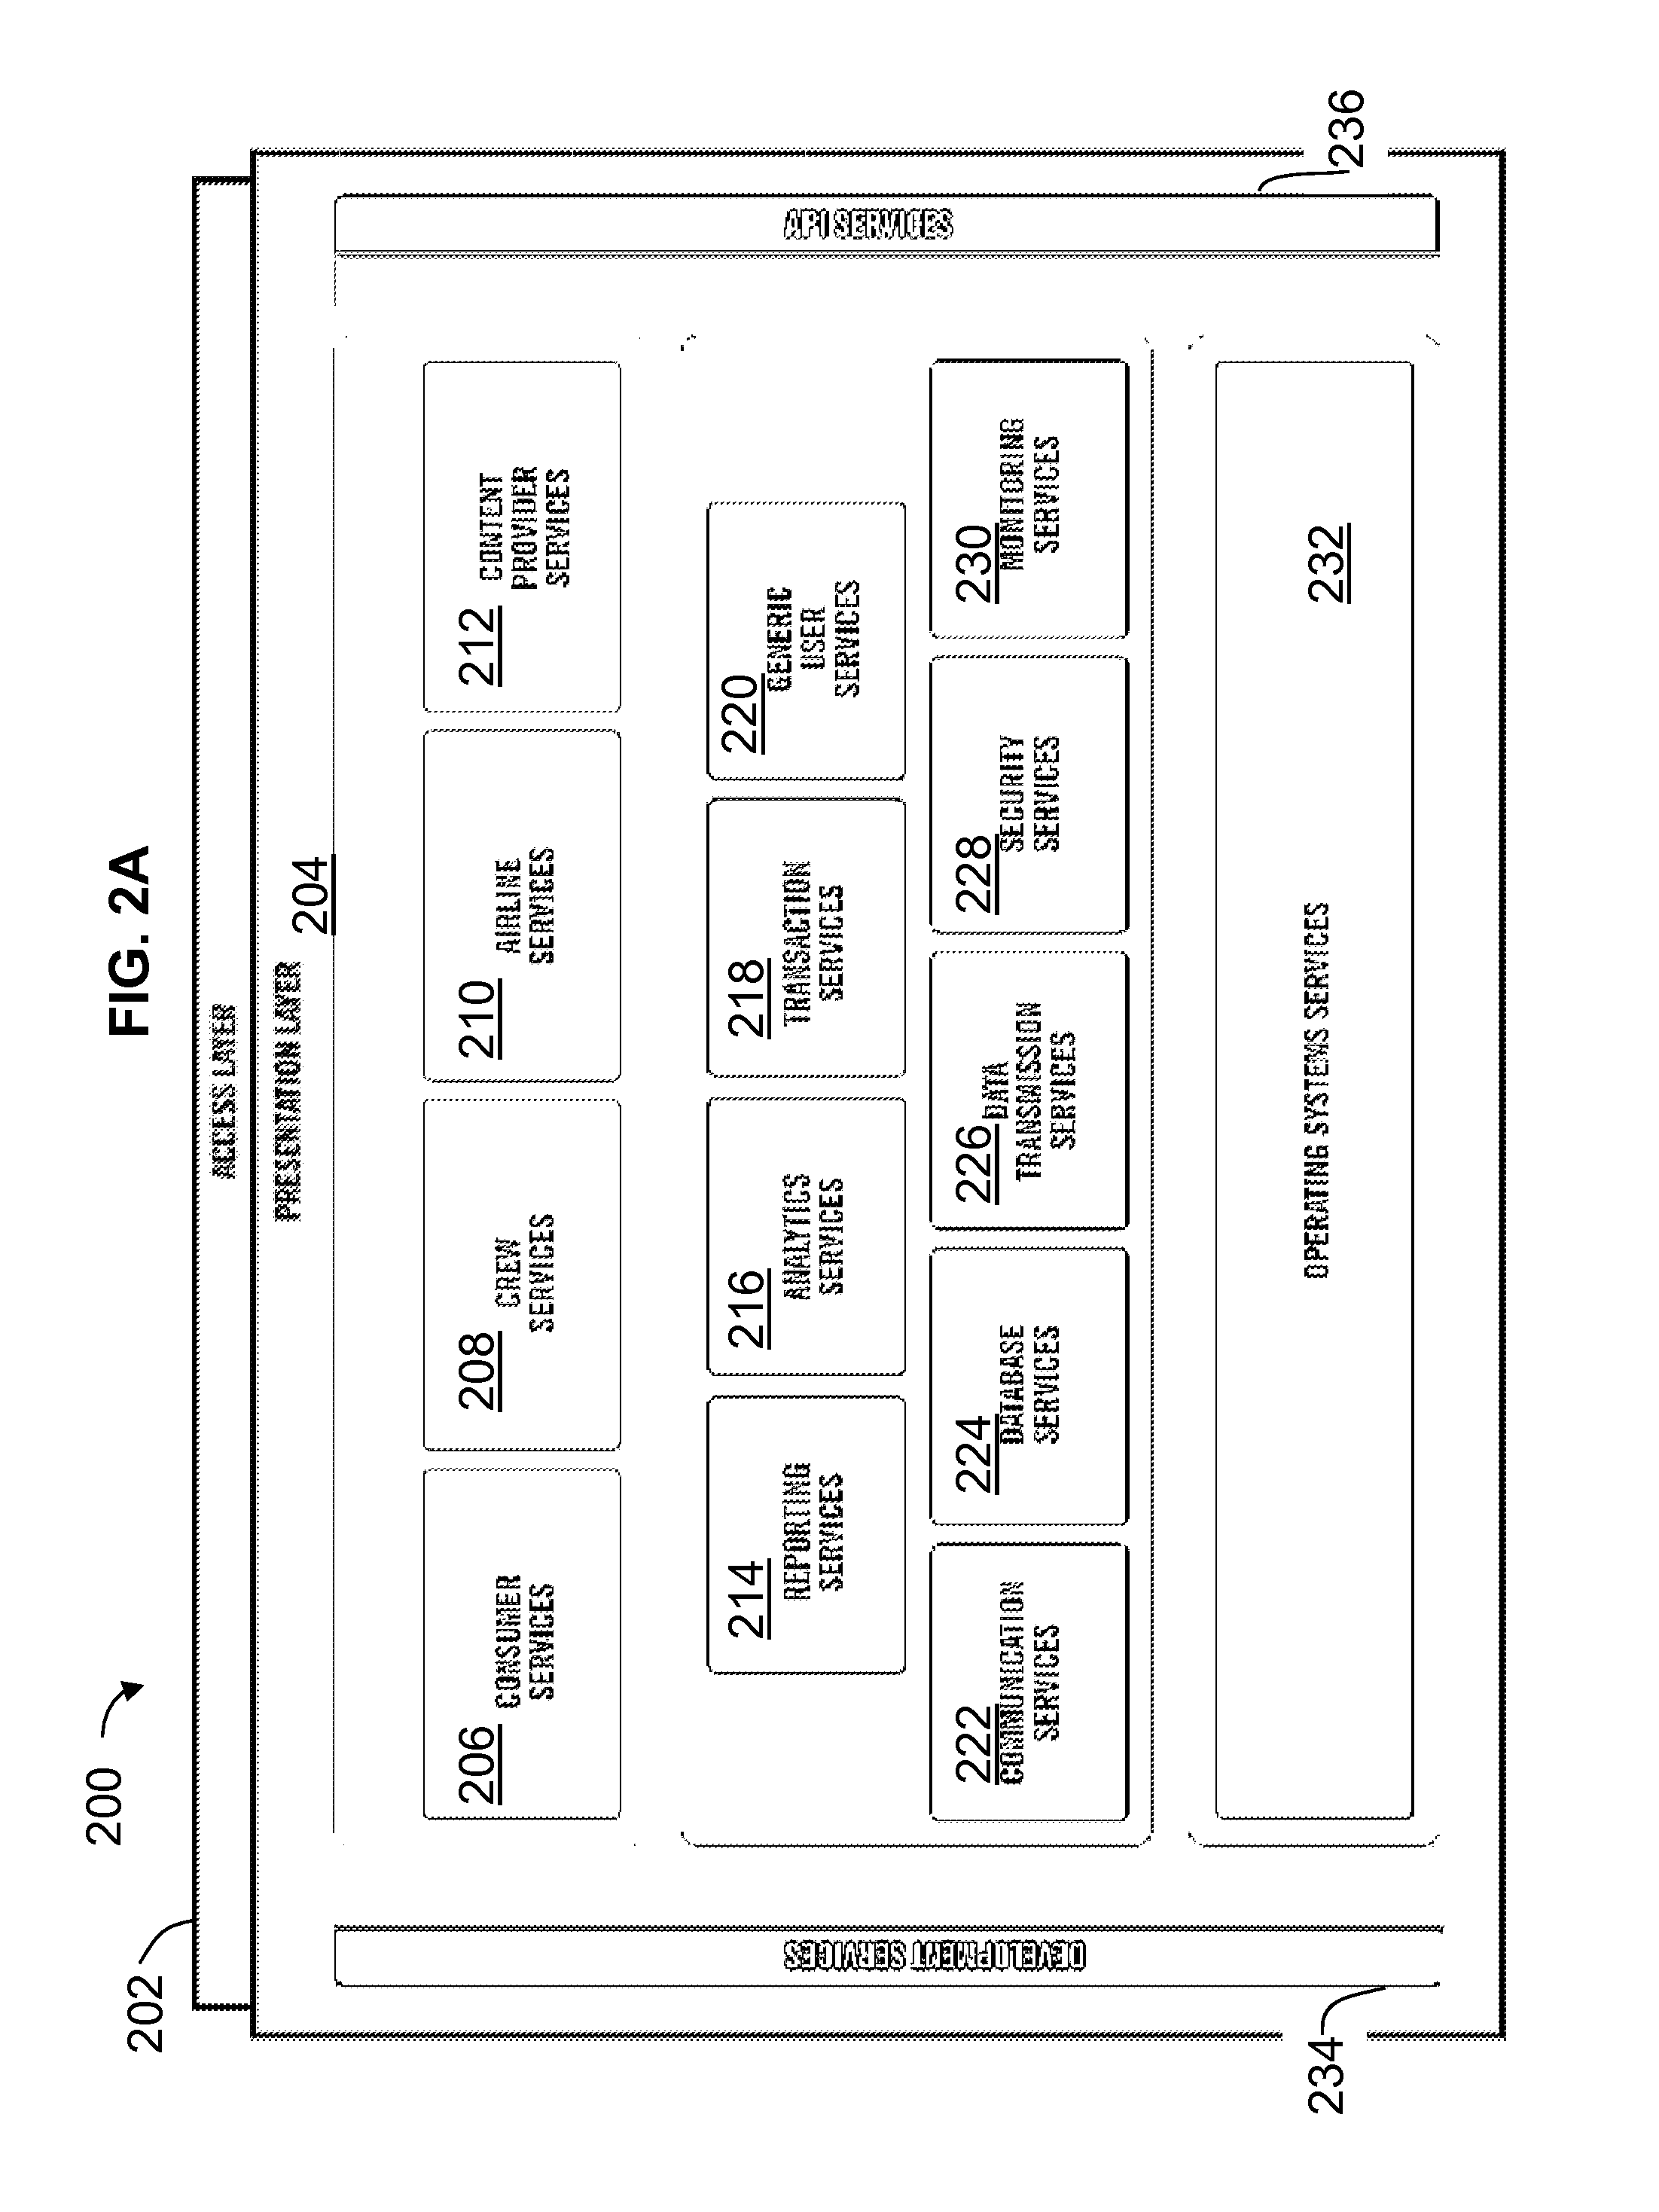 Systems and methods for integration of travel and related services and operations